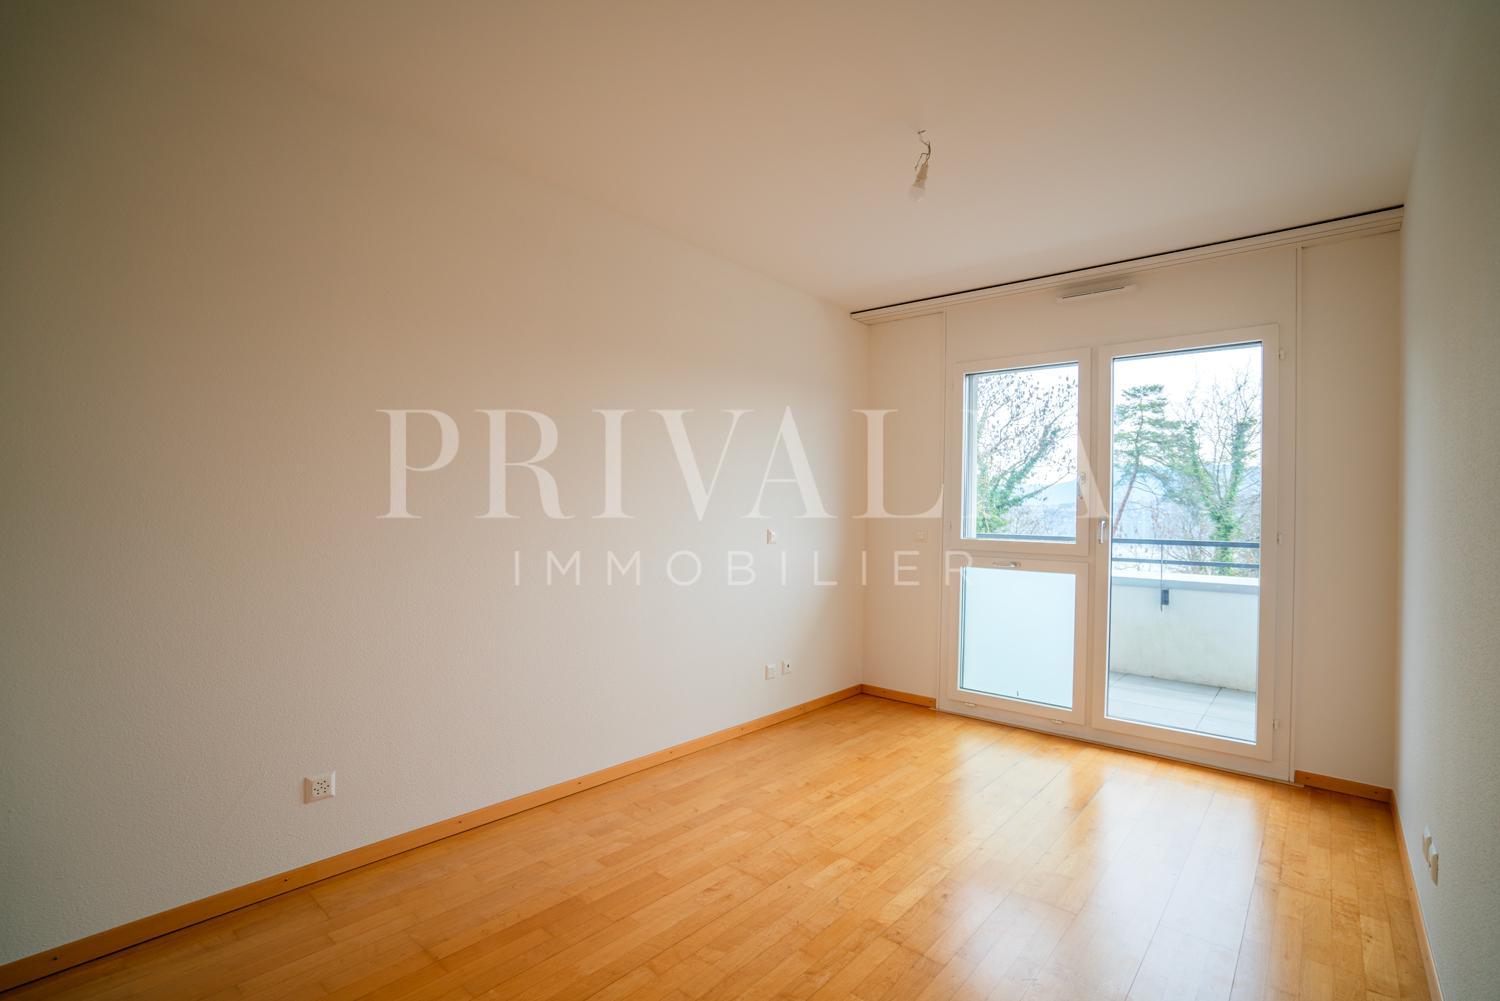 PrivaliaBeautiful 6.5 room penthouse in a secure residence